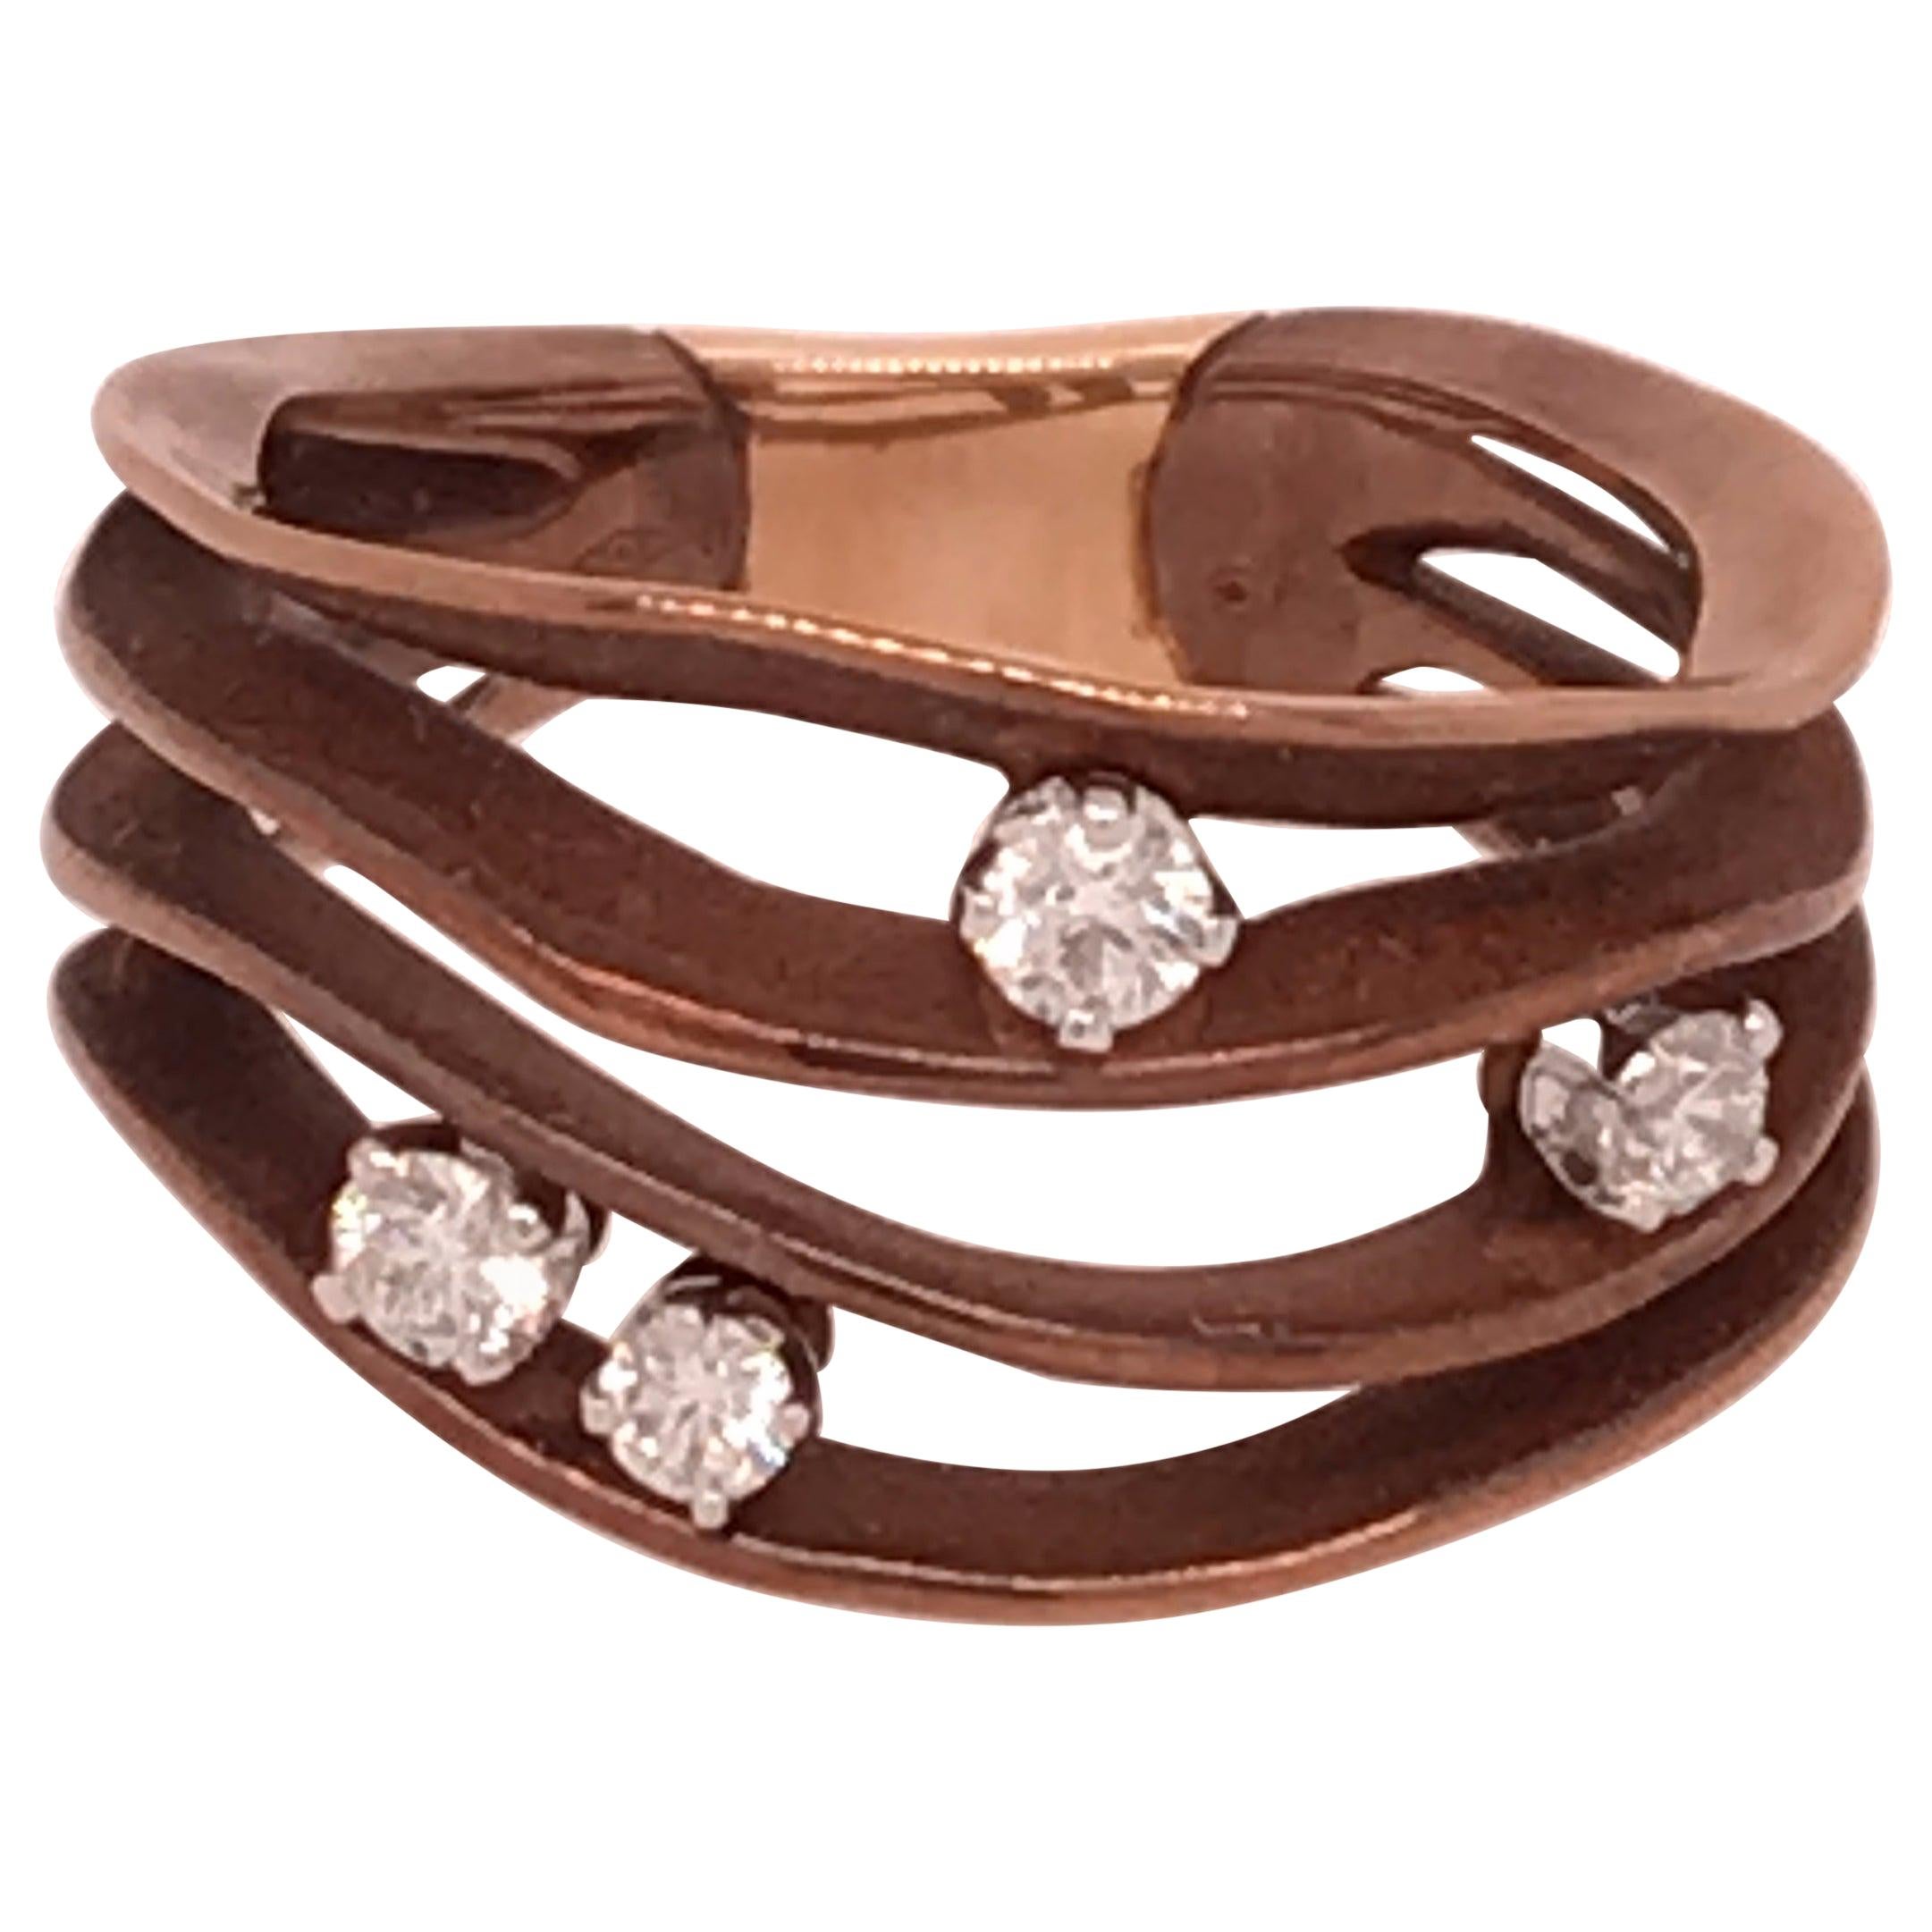 For Sale:  Annamaria Cammilli "Dune" Ring with Four Diamonds in 18k Brown Chocolate Gold